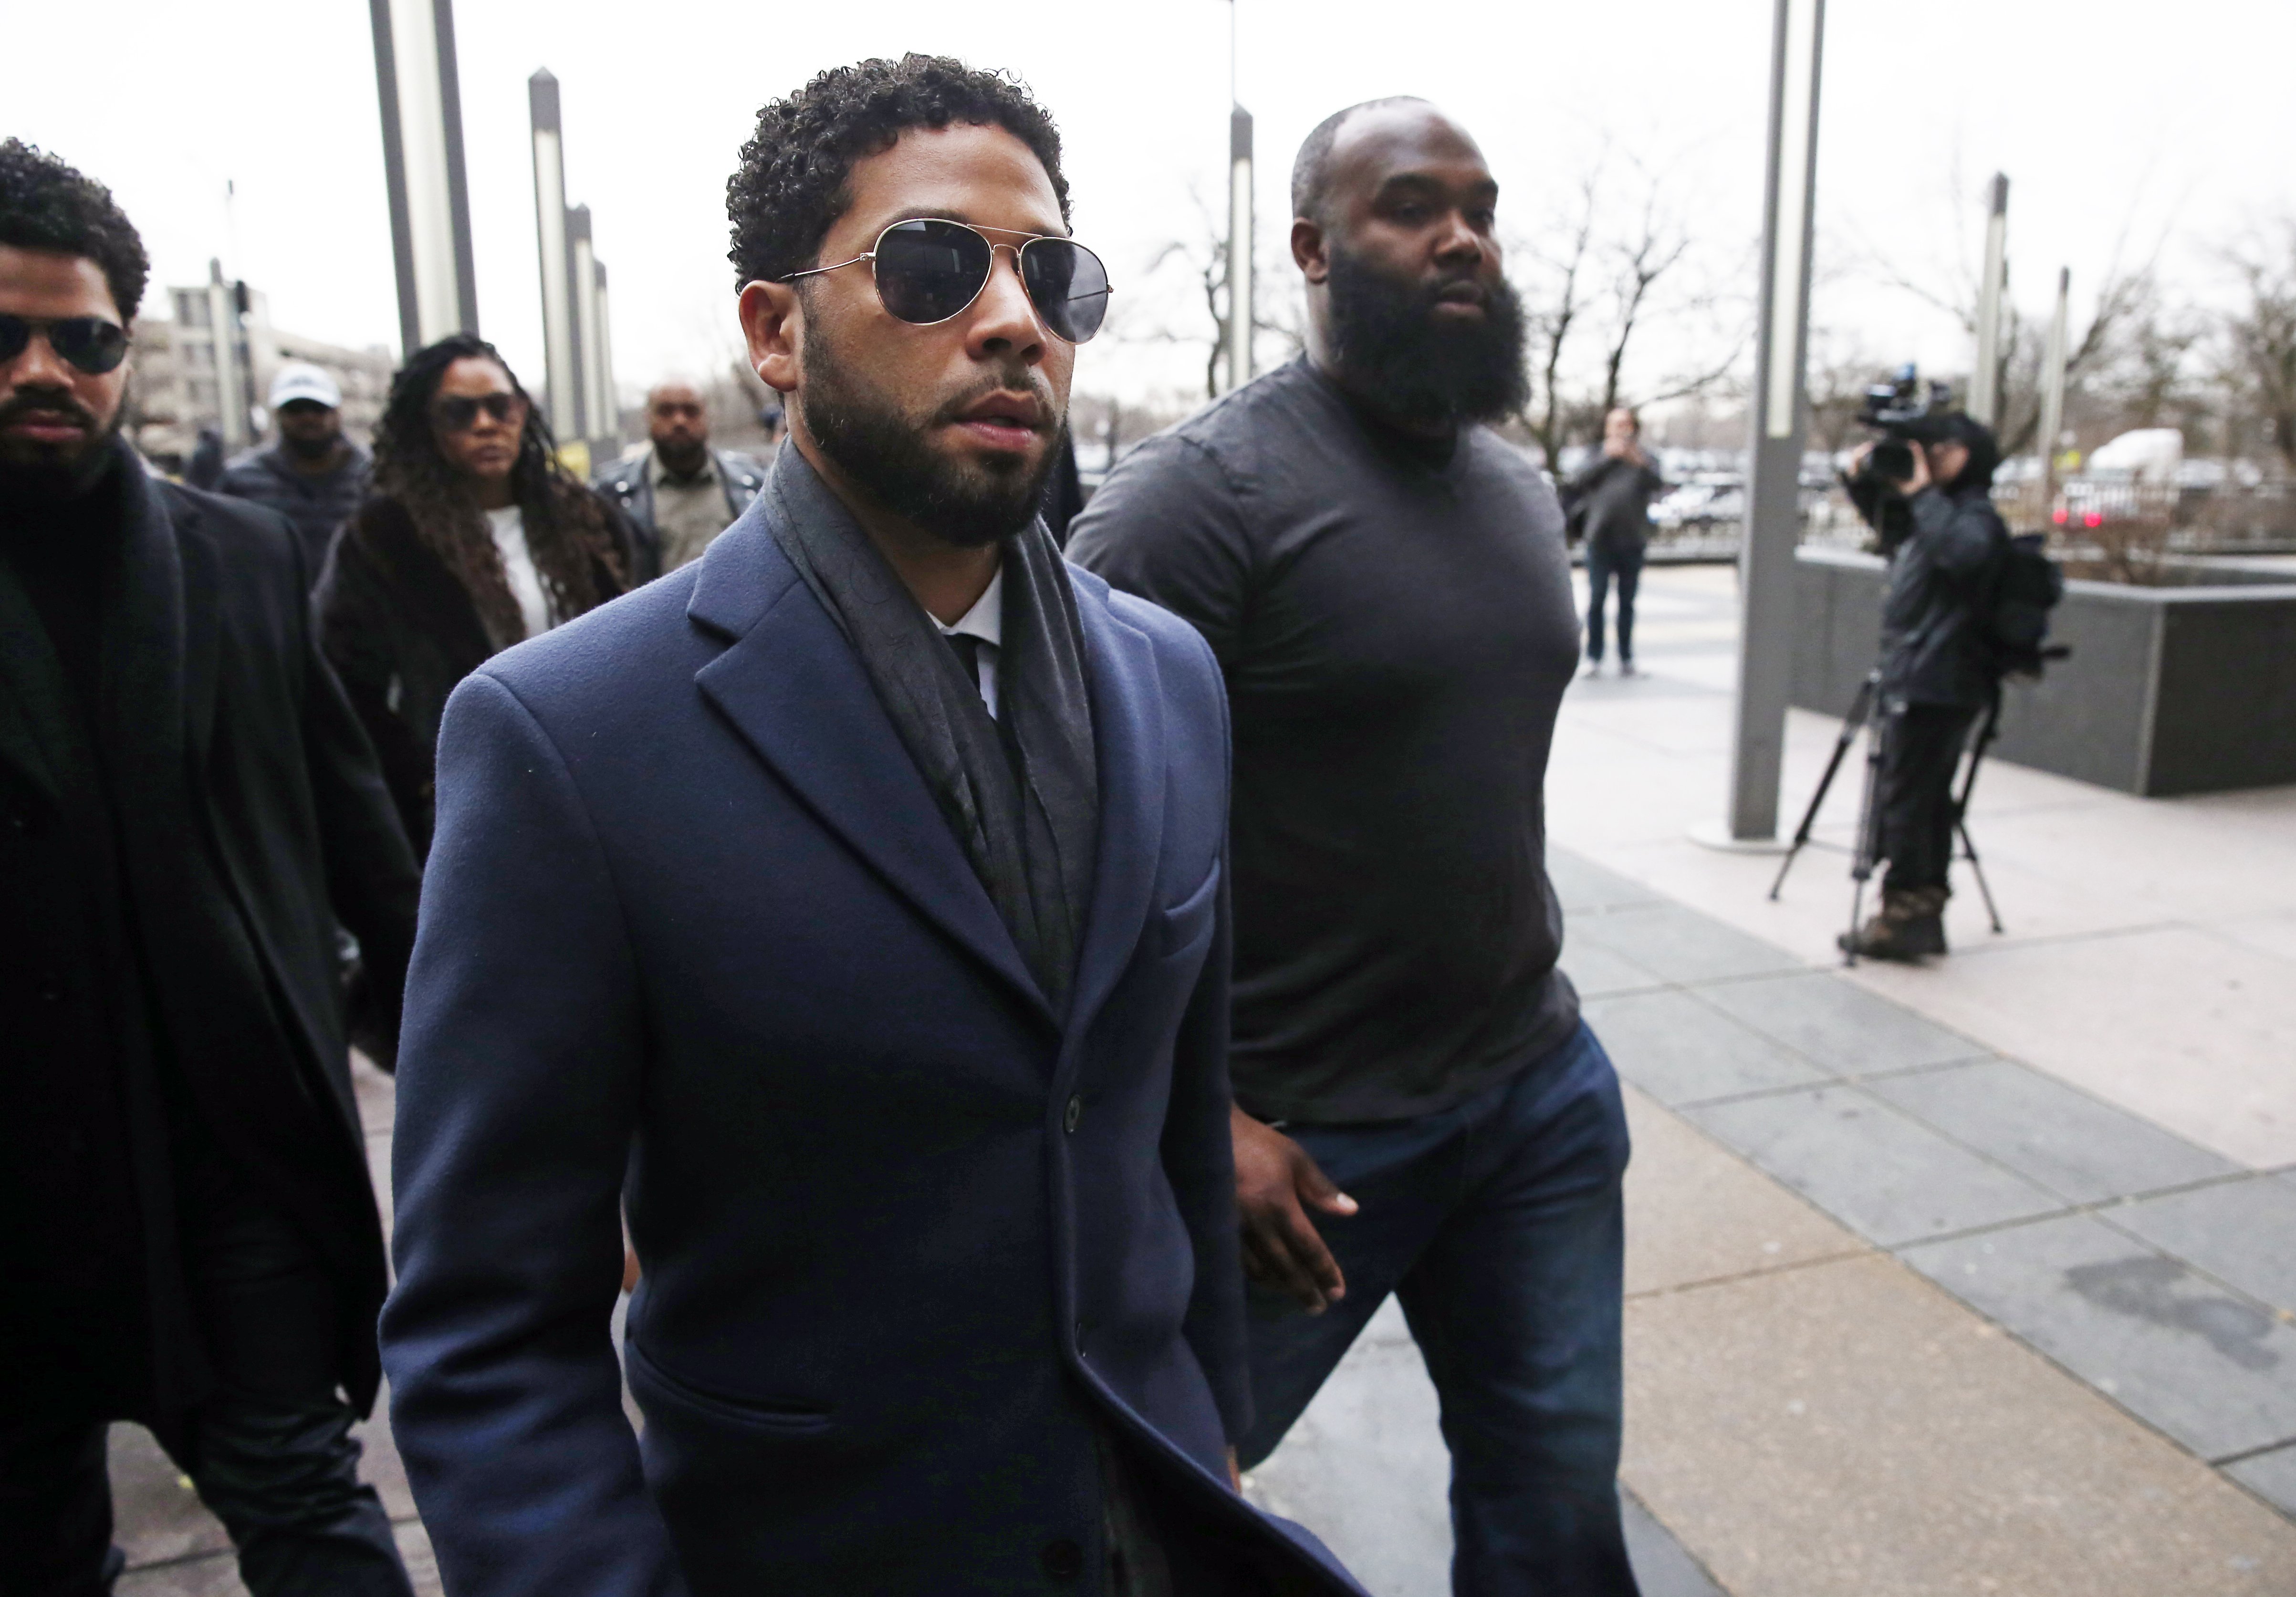 ussie Smollett arrives at Leighton Criminal Courthouse on March 14, 2019 in Chicago. | Photo: GettyImages/Global Images of Ukraine